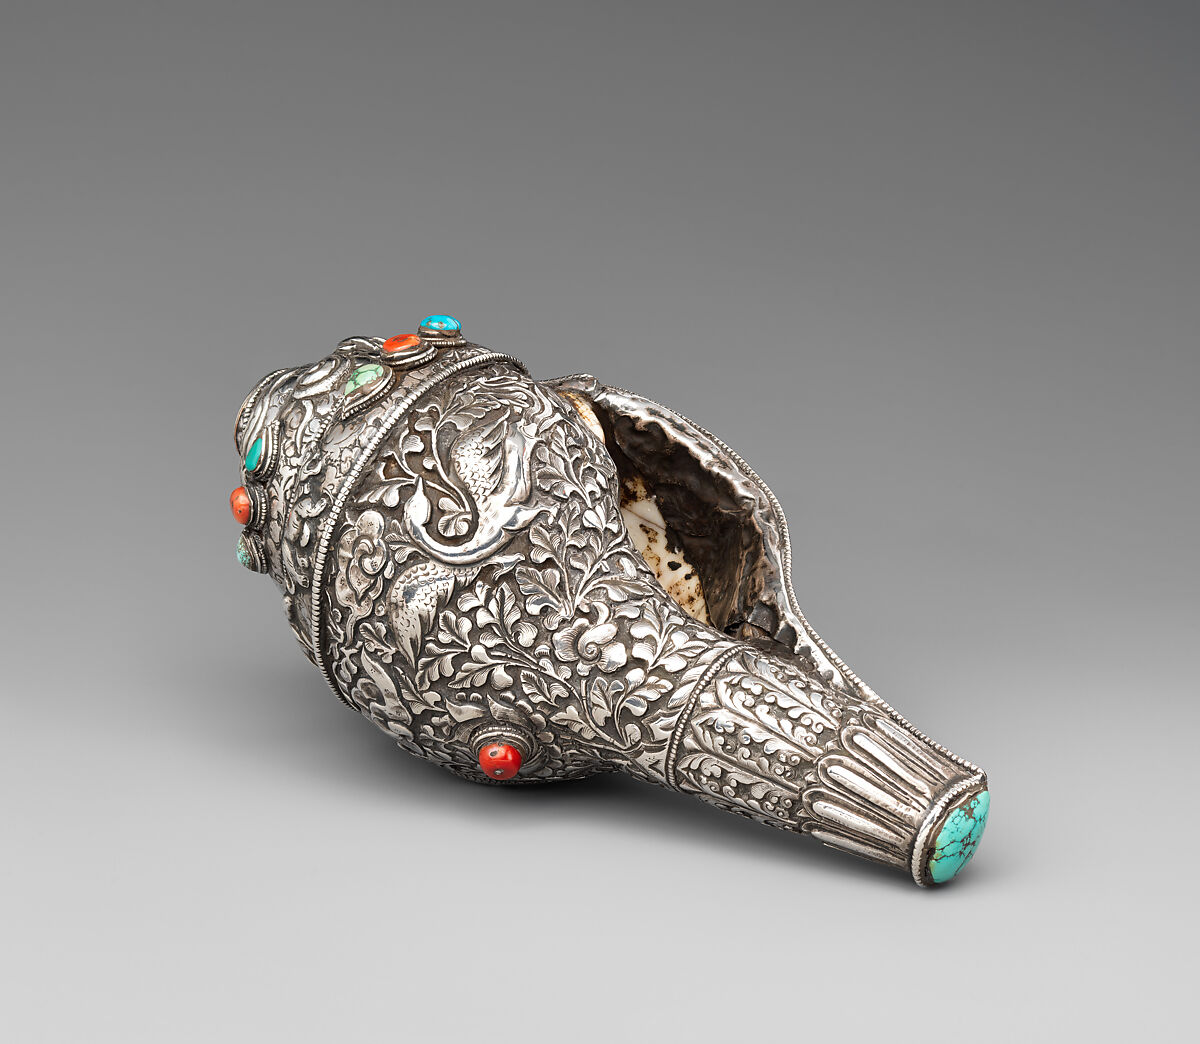 Ritual Conch Shell Trumpet (Dung-Dkar), Conch shell, silver, turquoise and coral, Tibet 